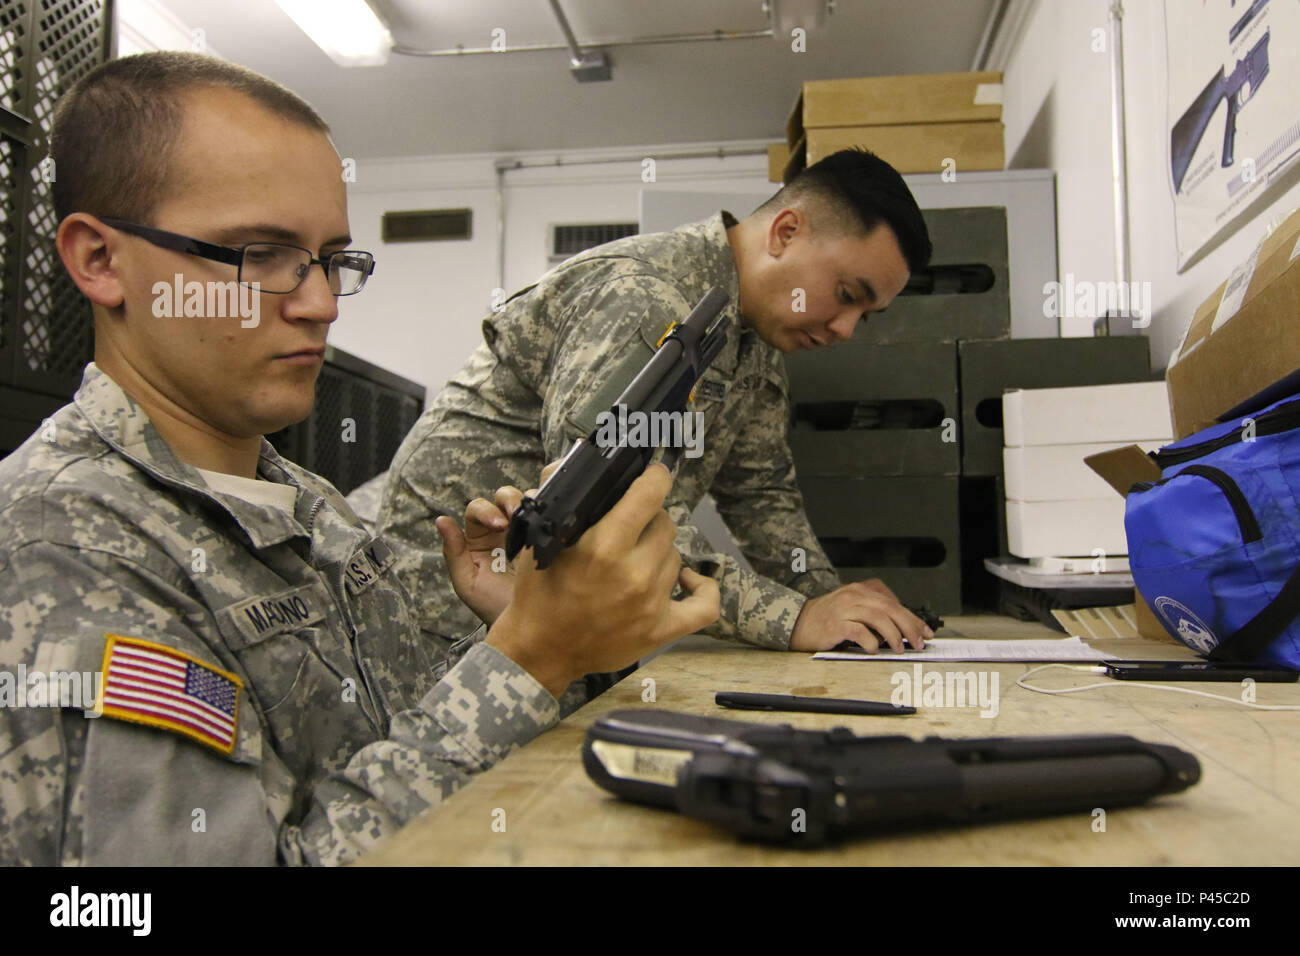 Arizona Army National Guard Spc. Sean M. Marciano and Sgt. Michael Restrepo, small-arms repairers with the 3666th Support Maintenance Company, inspect M9 pistols, June 22, at Fort Greely, Alaska, which is located approximately 100 miles southeast of Fairbanks, Alaska. The two Arizona Guardsmen were at Fort Greely during their annual training as part of mobile repair team that inspected nearly 600 weapons for the Alaska National Guard’s 49th Missile Defense Battalion. (Arizona Army National Guard photo by Staff Sgt. Brian A. Barbour) Stock Photo